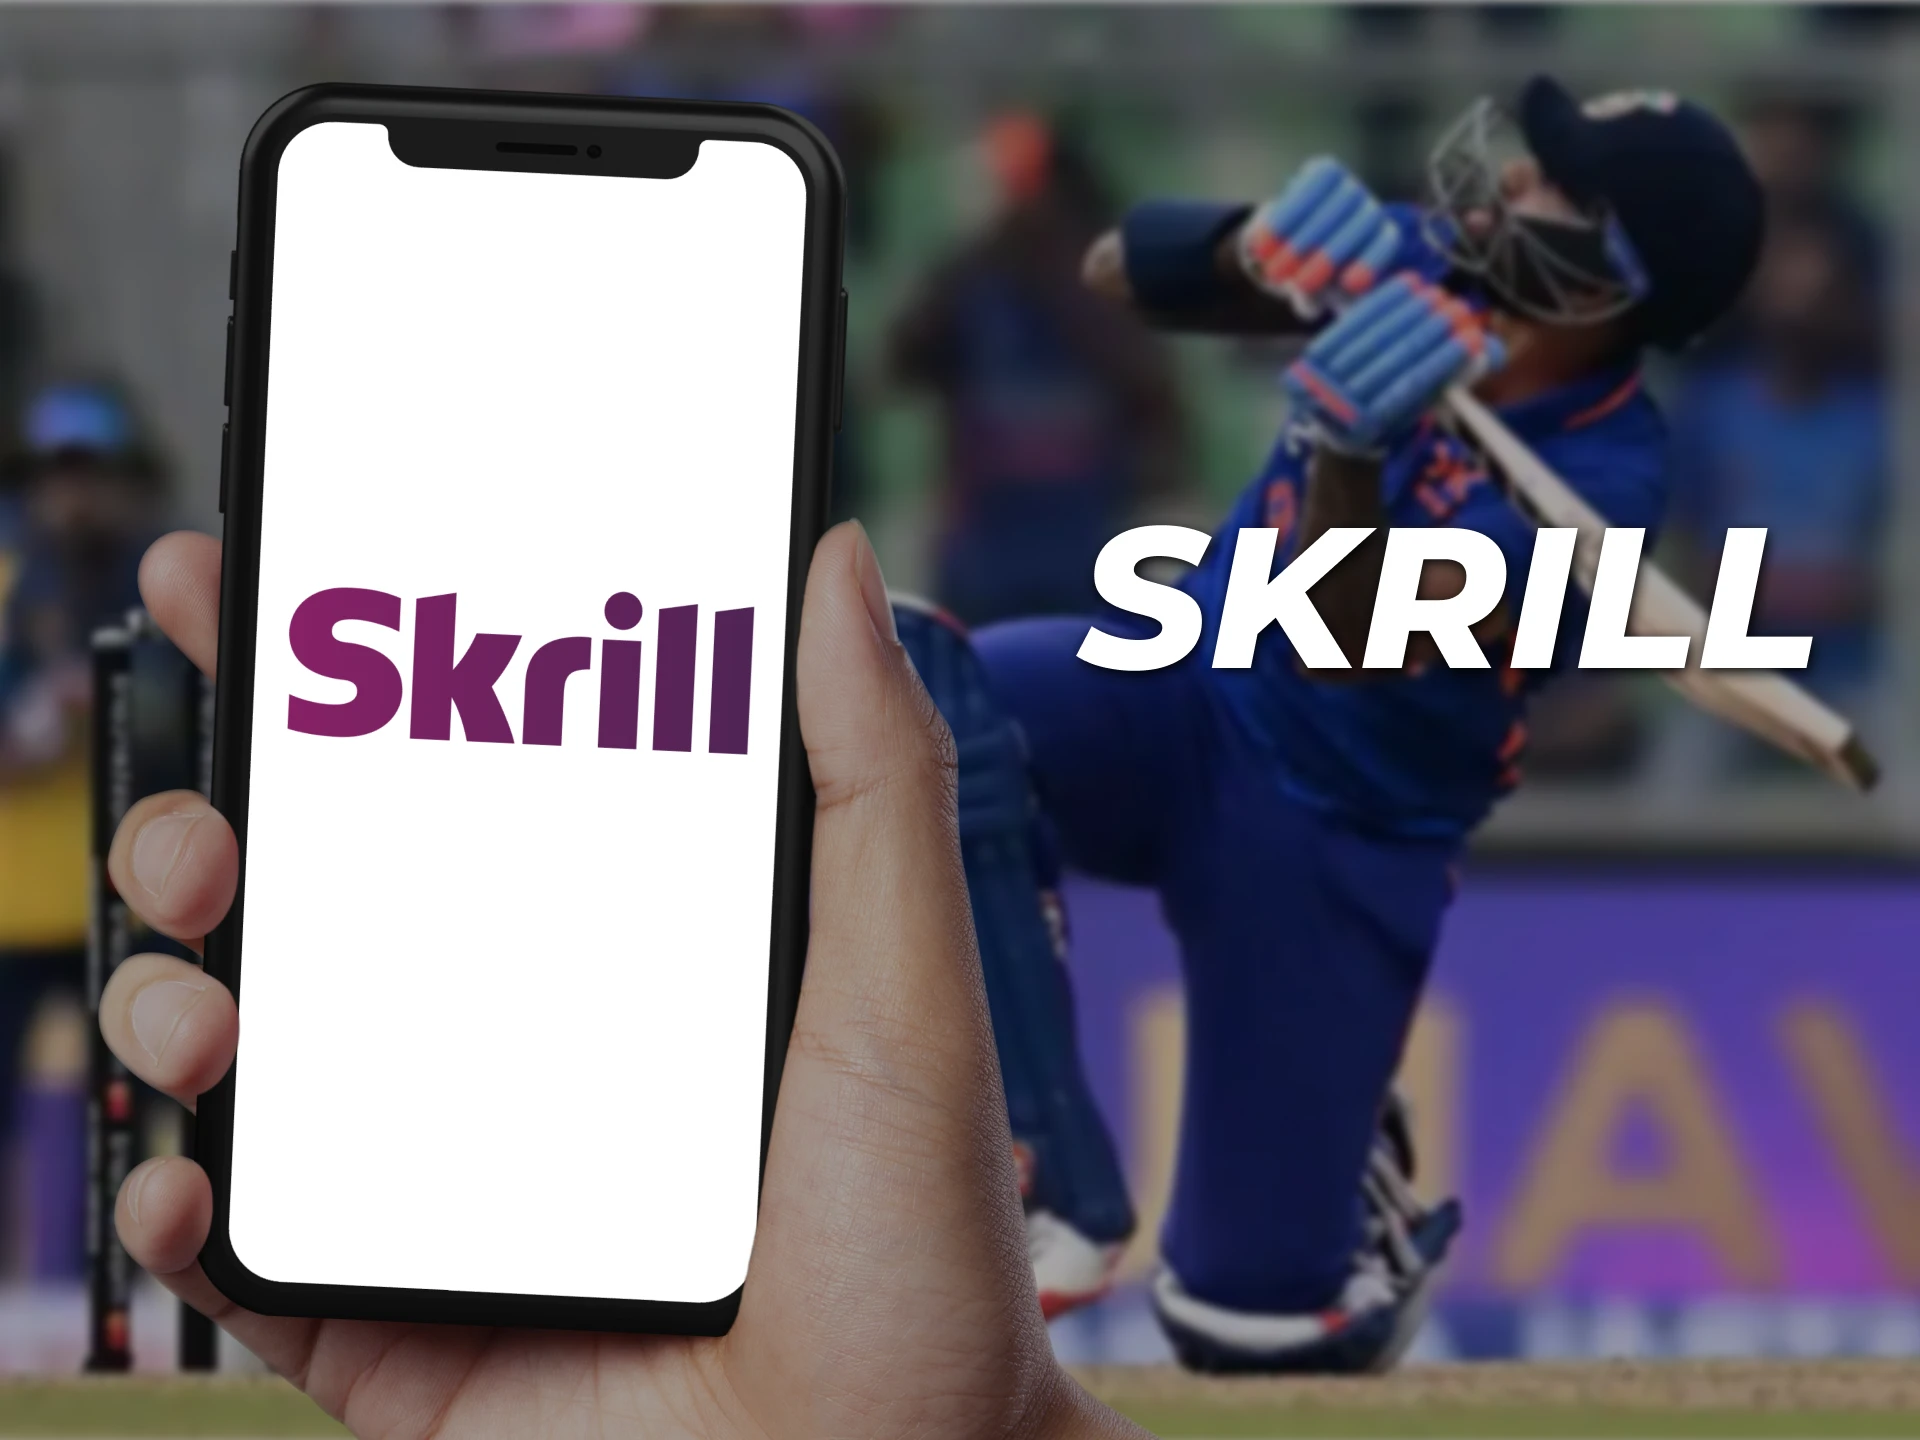 Make deposits and withdrawals using your Skrill digital wallet.